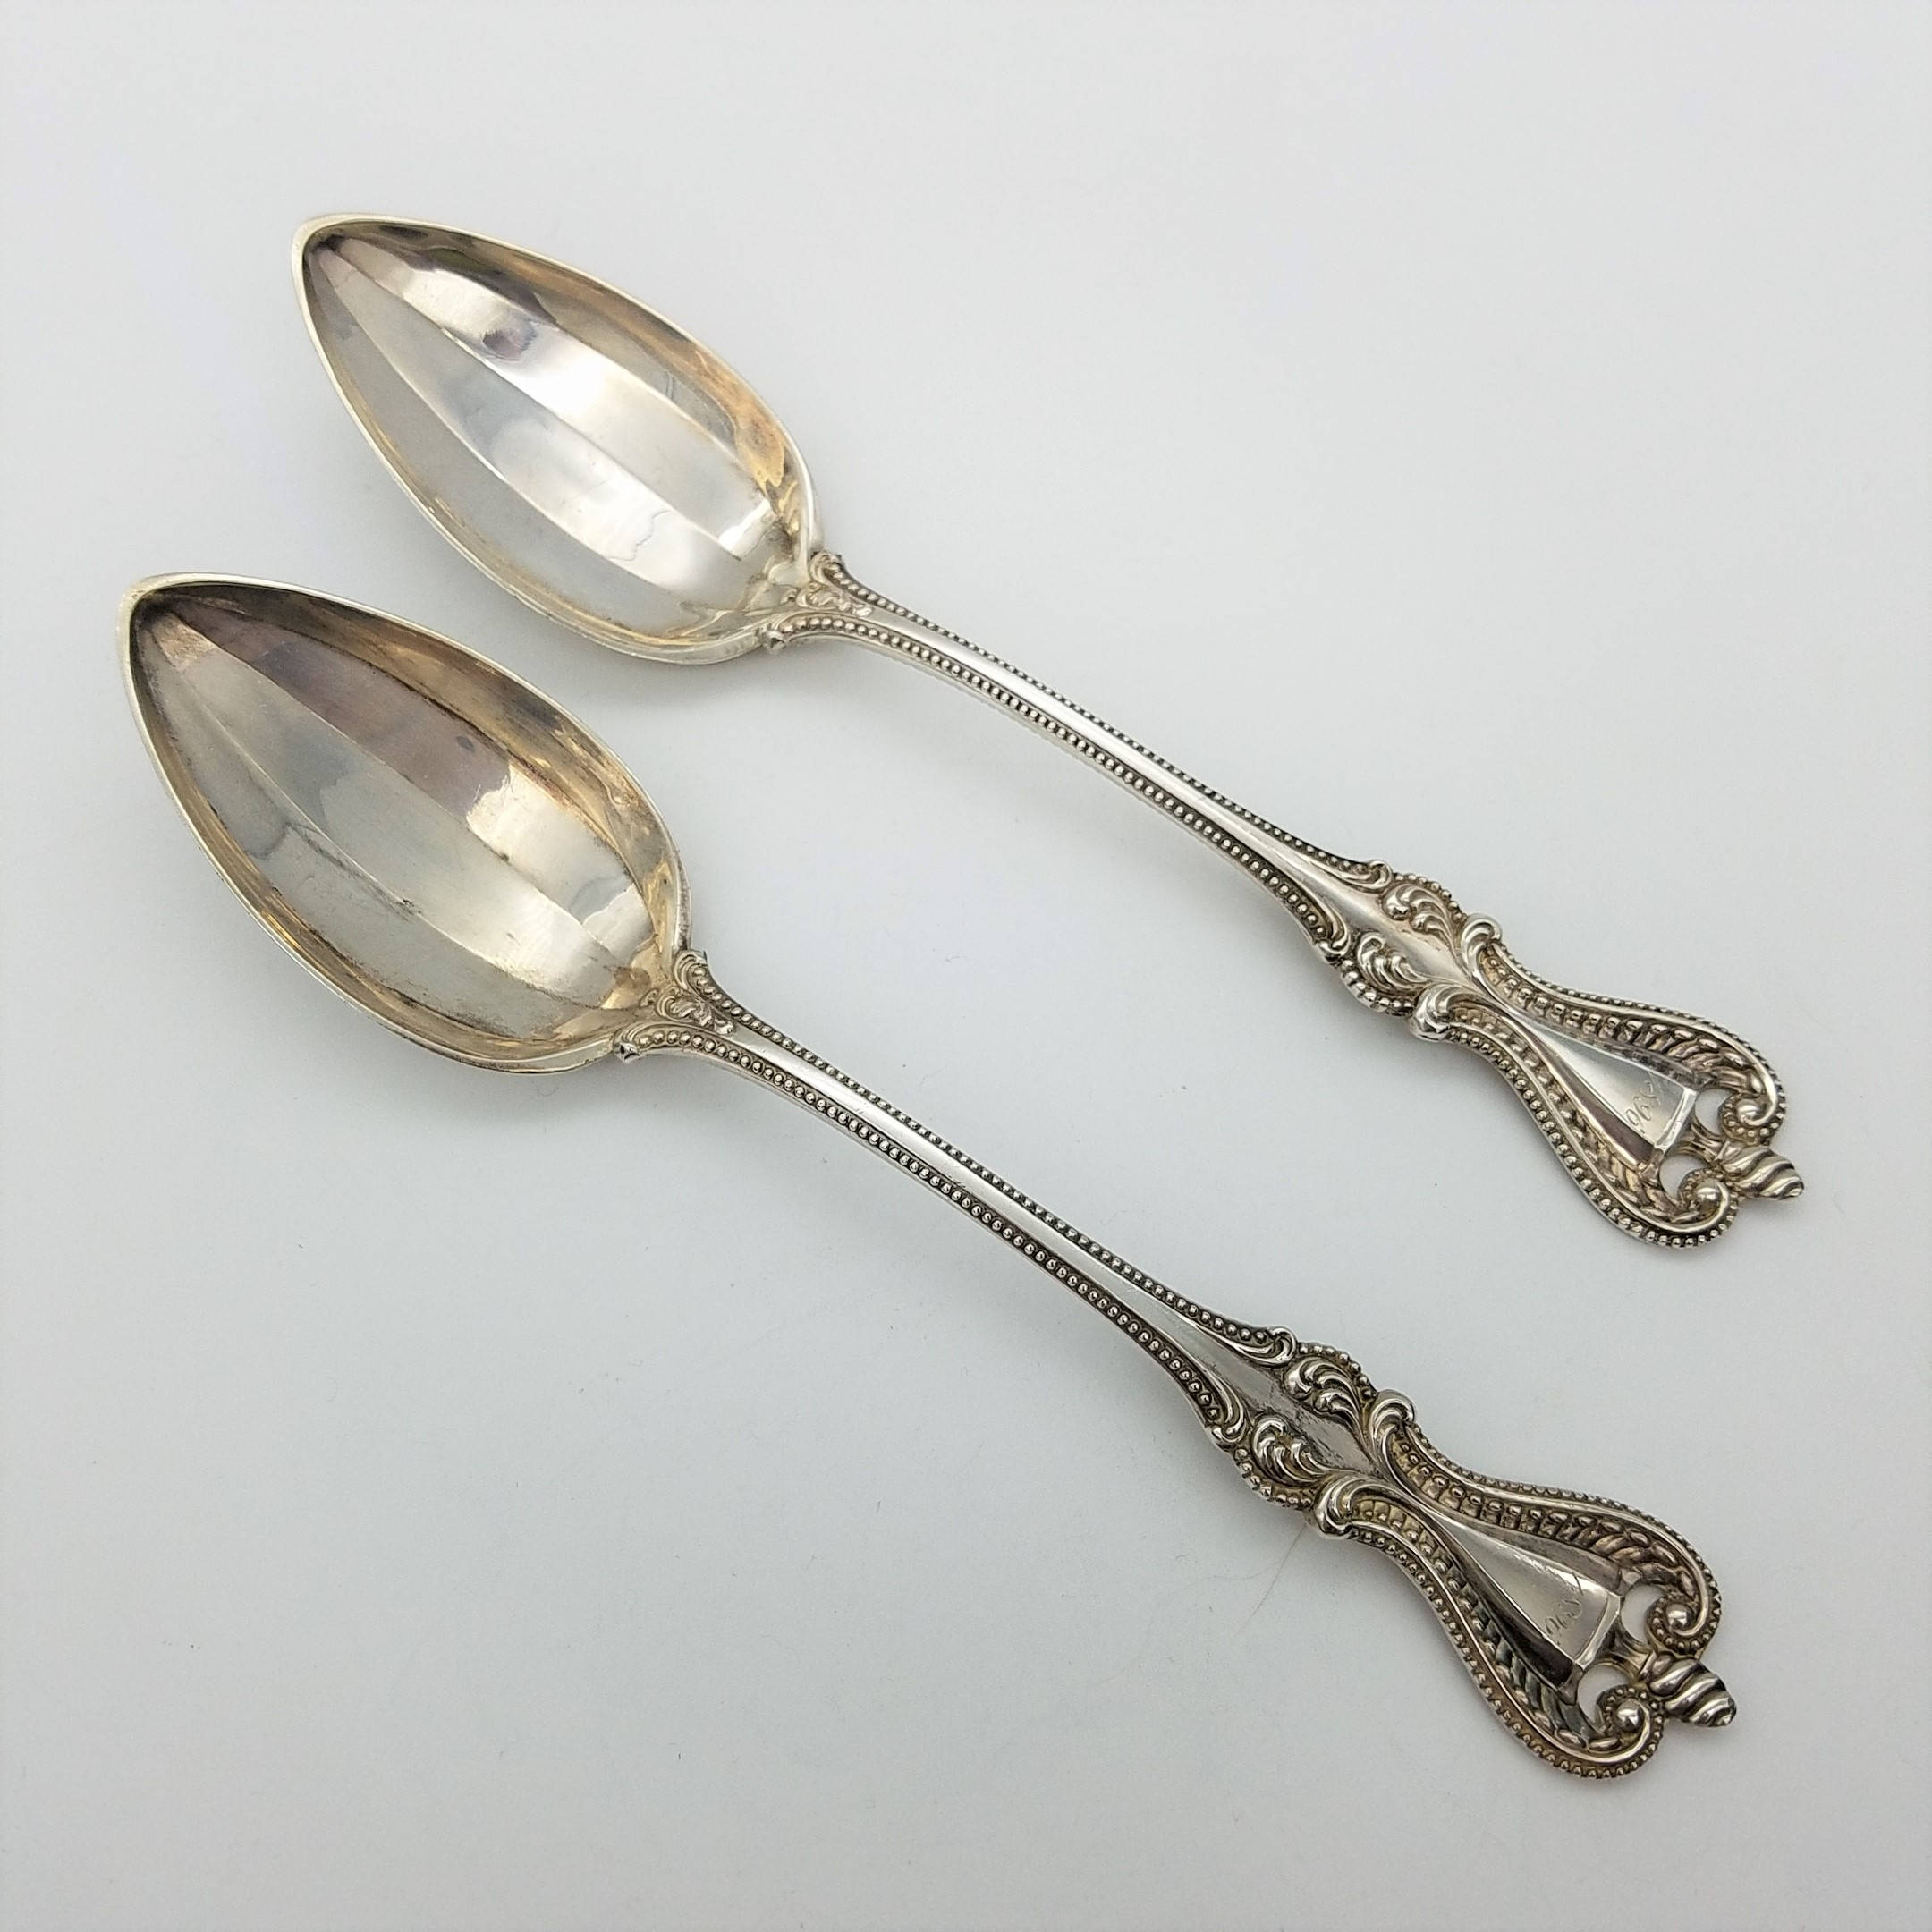 Details about   MANSFIELD 1932 OVAL SOUP OR DESSERT SPOON BY RELIANCE 